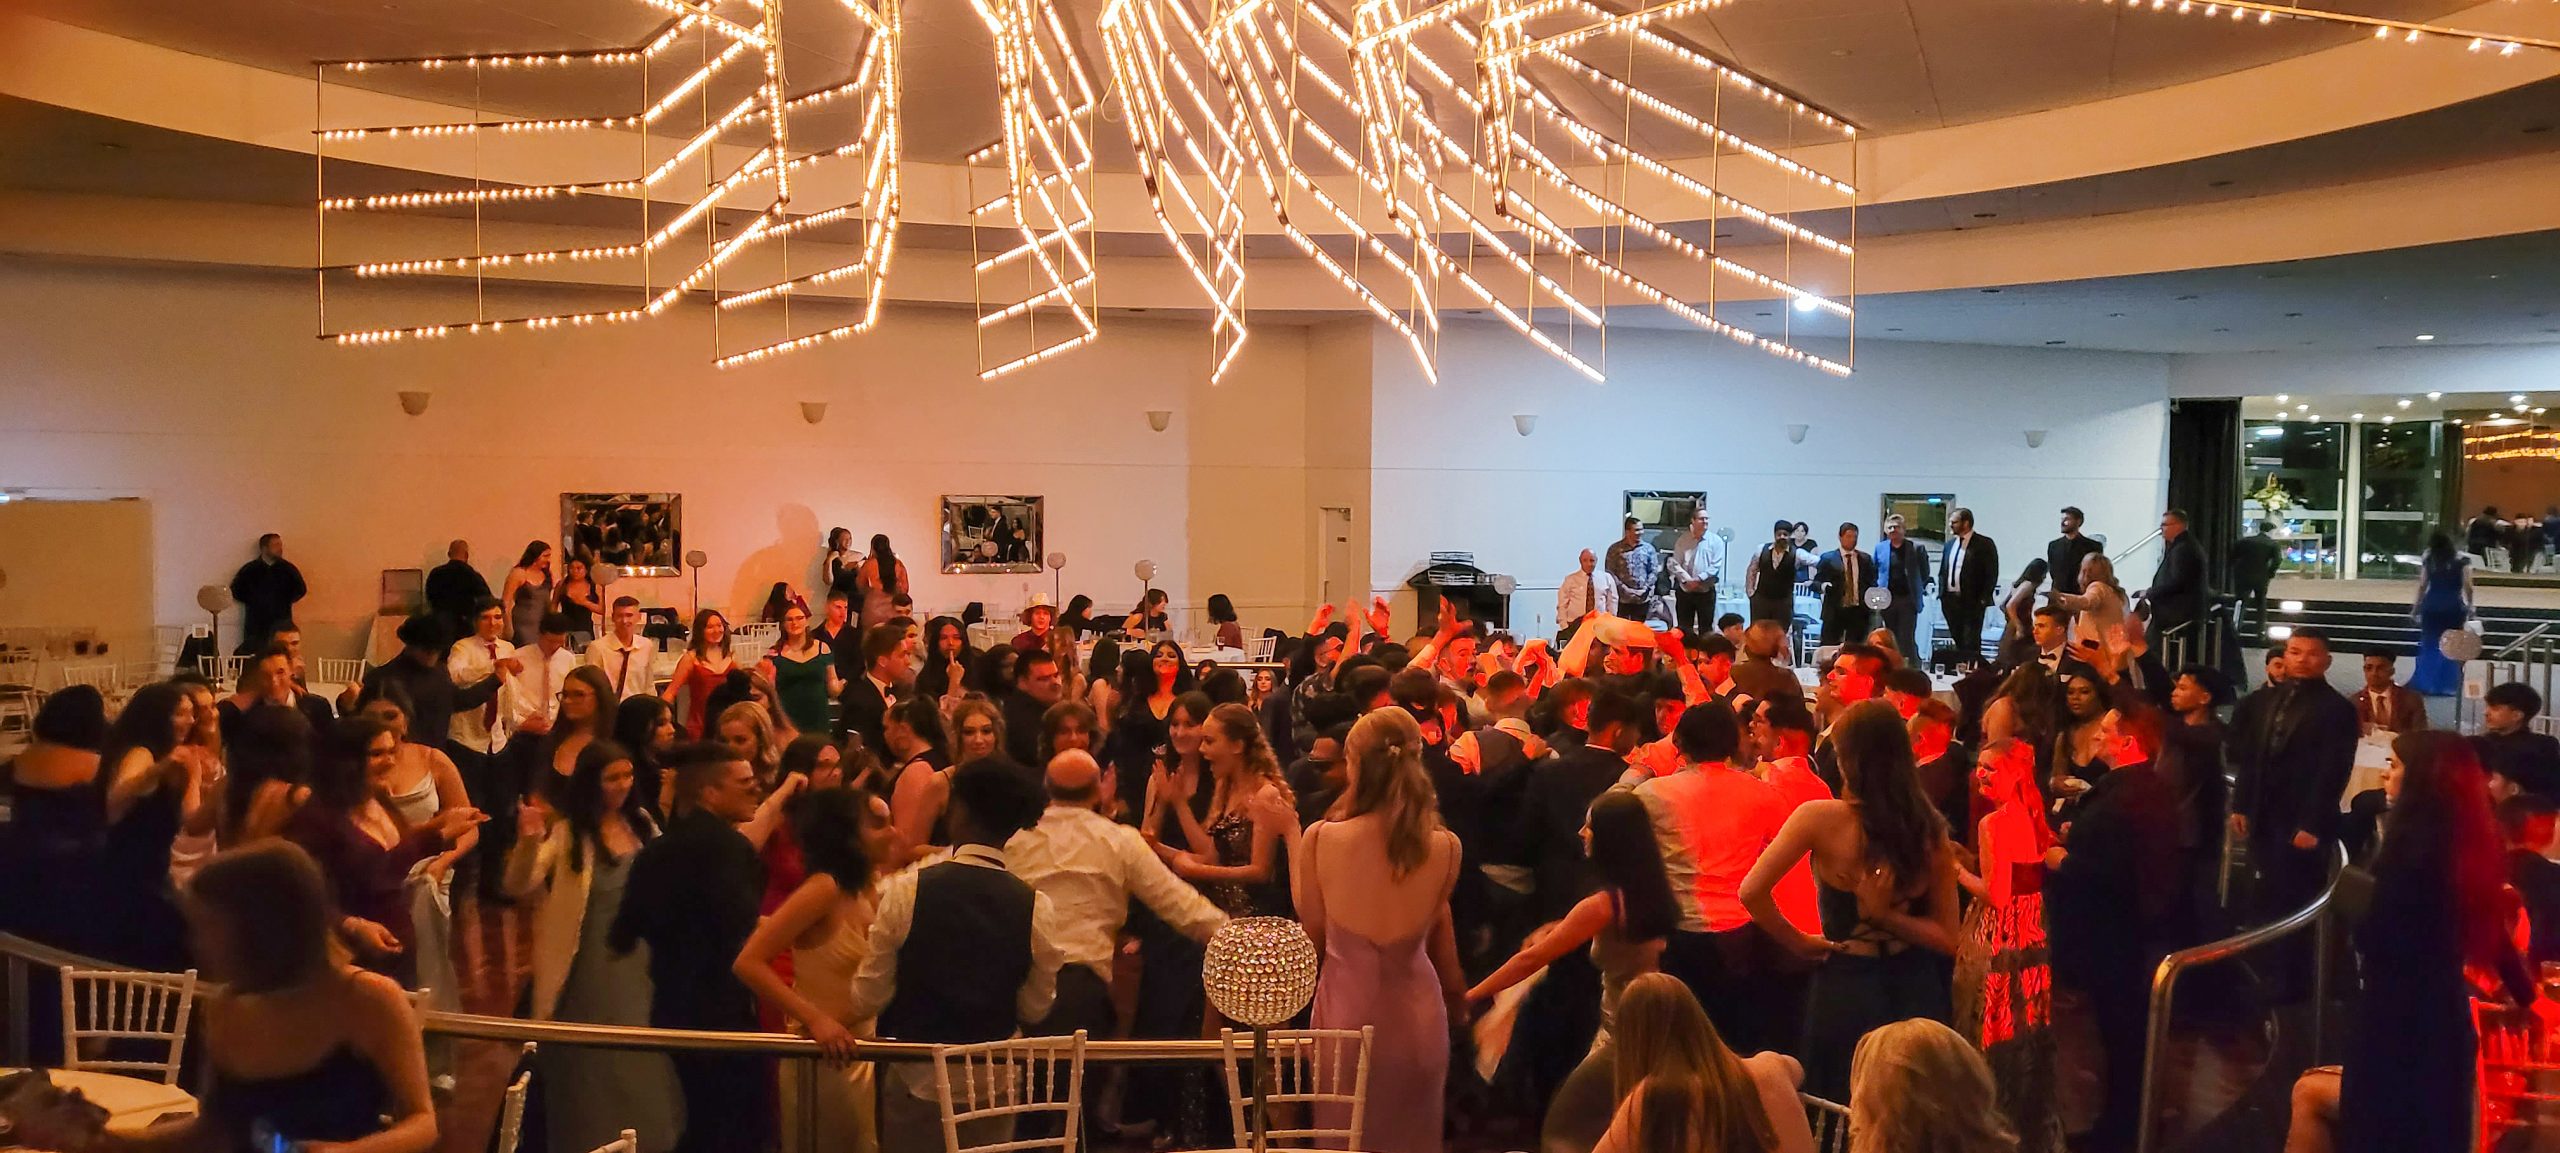 Class of 2022 Year 12 Formal | Copperfield College